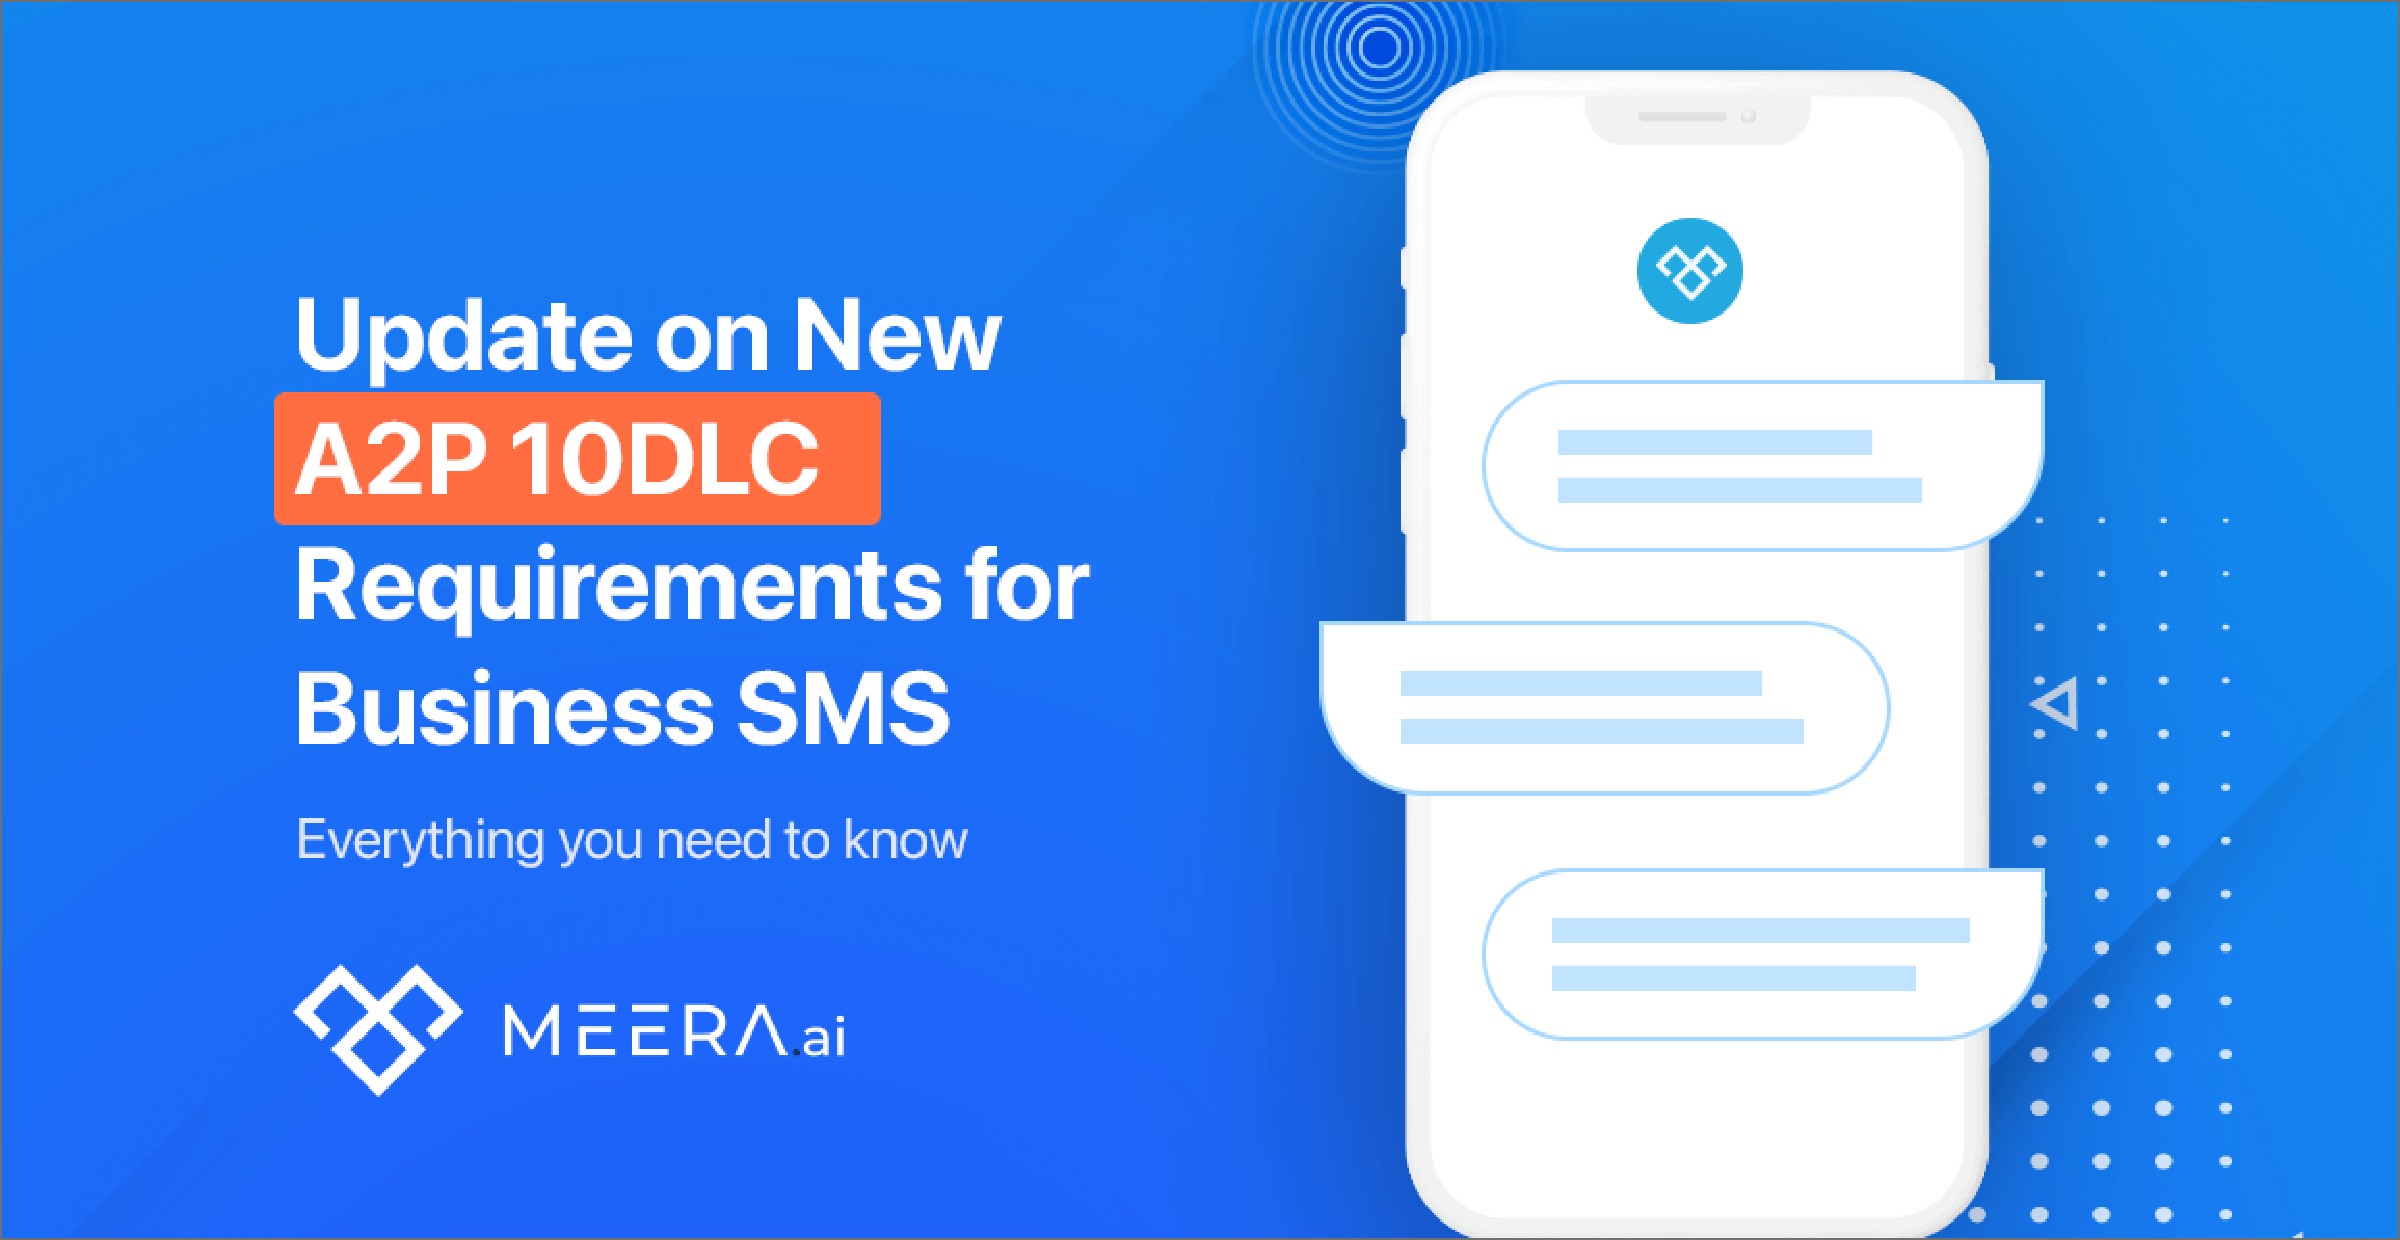 Text, illustrated with a mobile phone, reads: “Update on new A2P 10DLC Requirements for Business SMS. Everything You Need to Know,“ followed by the Meera.AI logo.